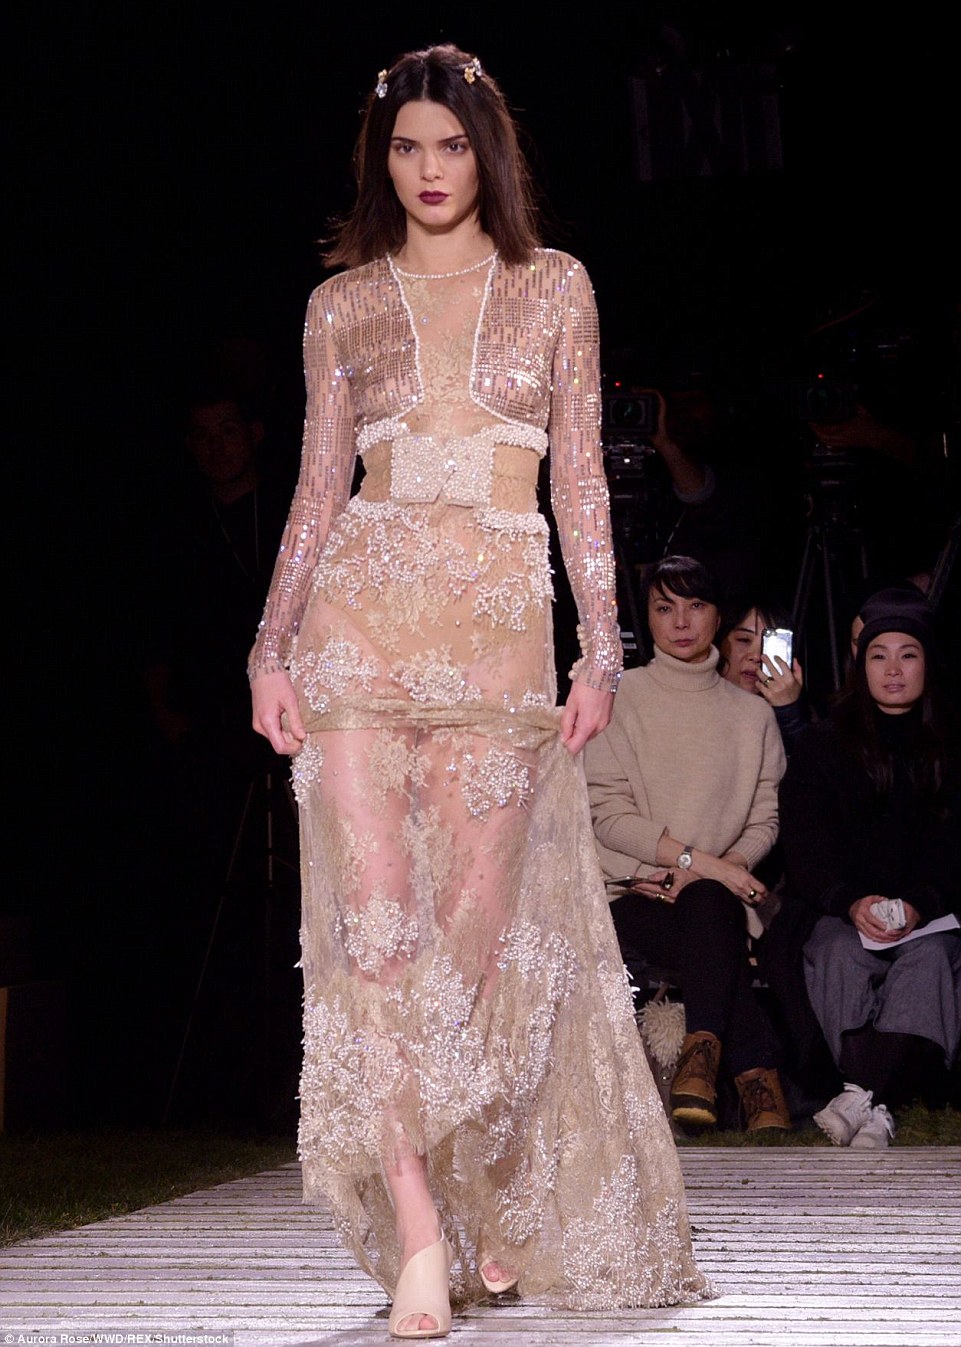 Kendall Jenner bares pert derriere in see-through gown as she hits catwalk for La Perla NYFW show